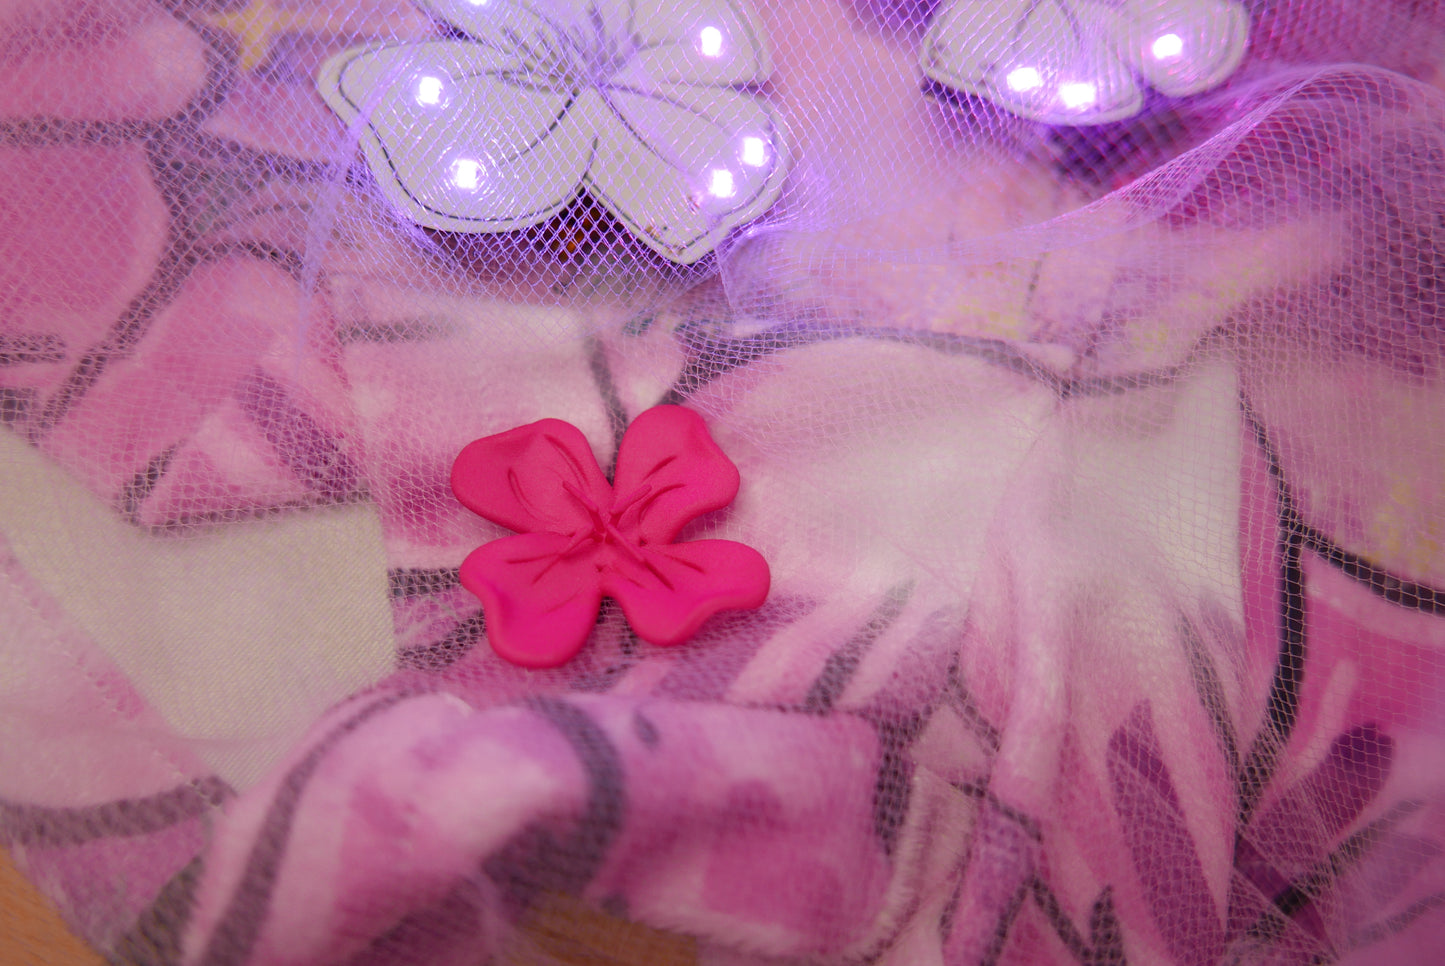 Flowers shorts 3D printed (made to measure)